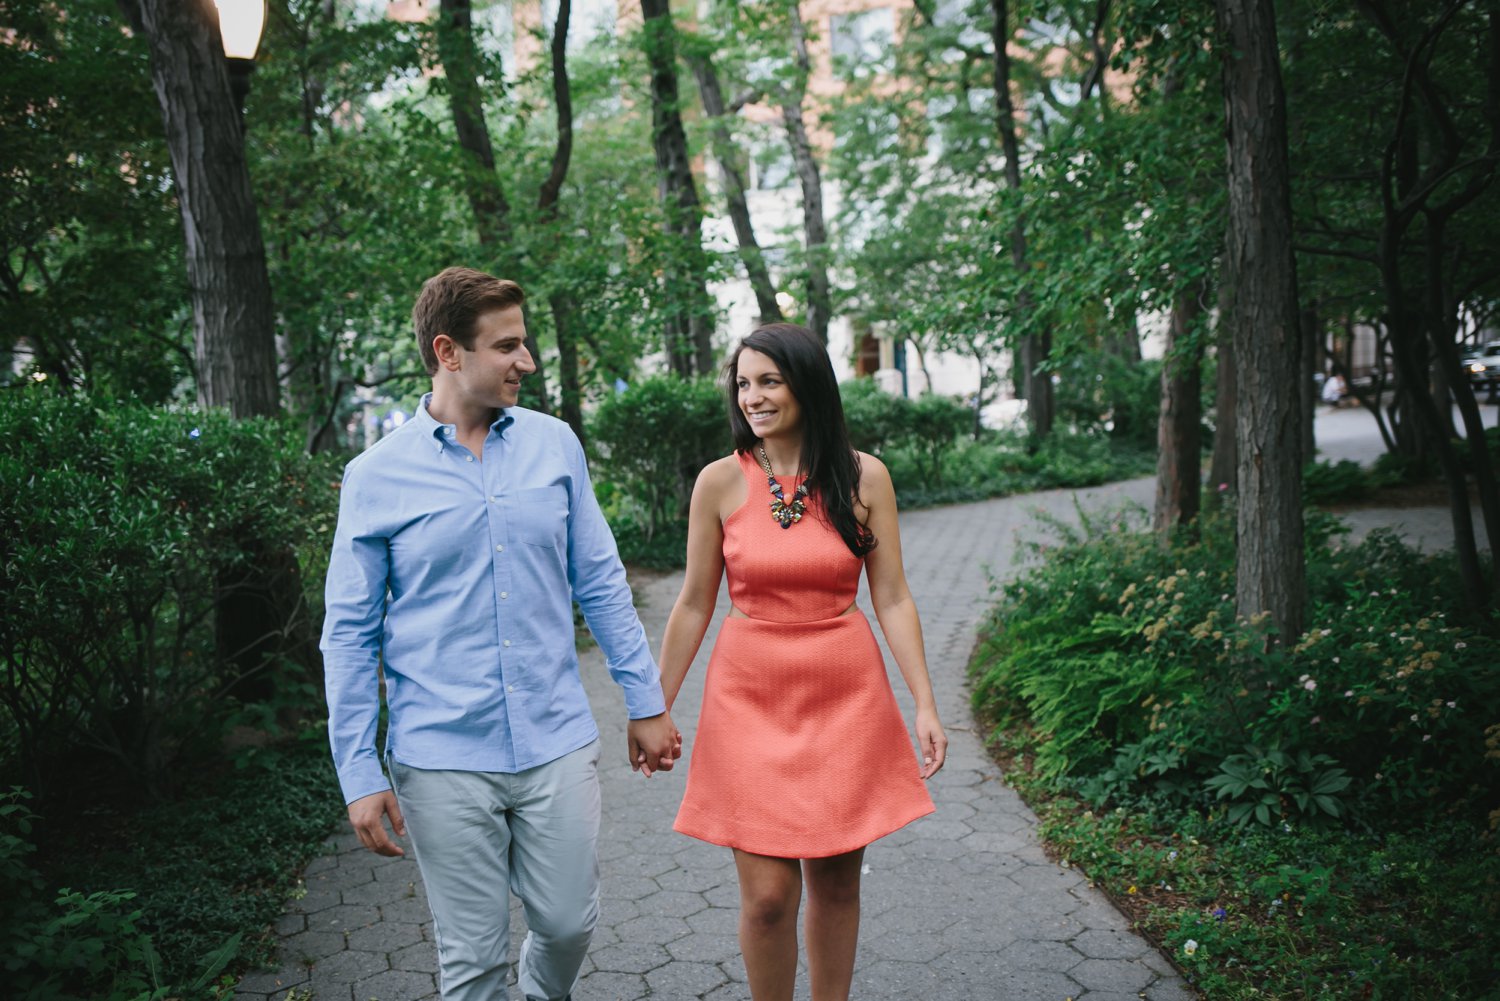 92NYC-NJ-ENGAGEMENT-PHOTOGRAPHY-BY-INTOTHESTORY-MOO-JAE.JPG